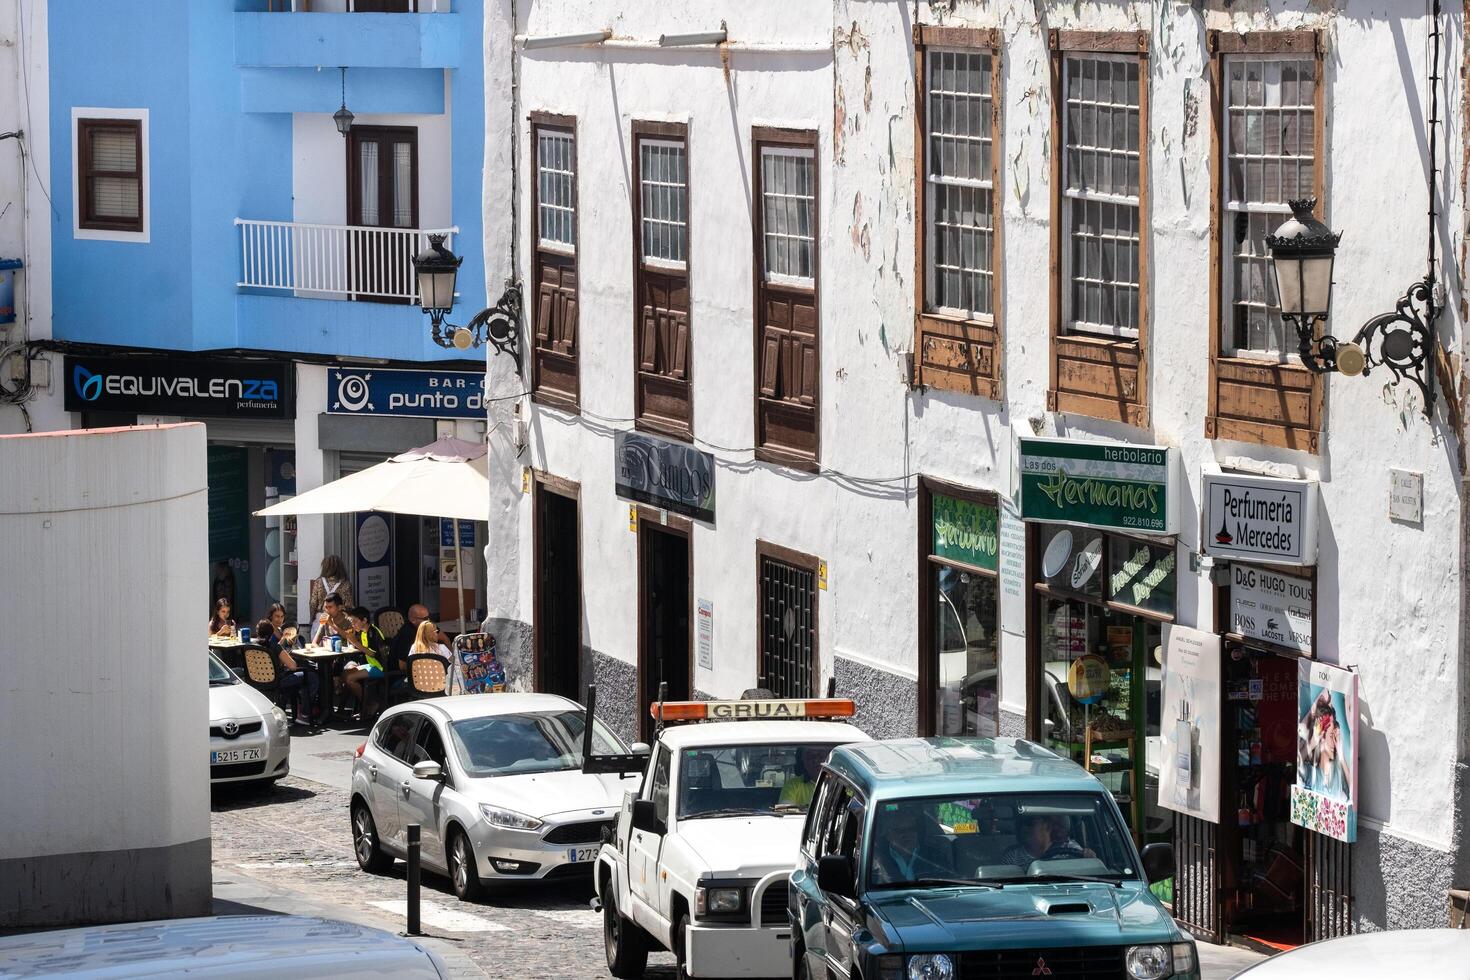 July 29, 2019.Canary Islands, Spain. The streets of the old town of Icod de Los Vinos on the island of Tenerife photo